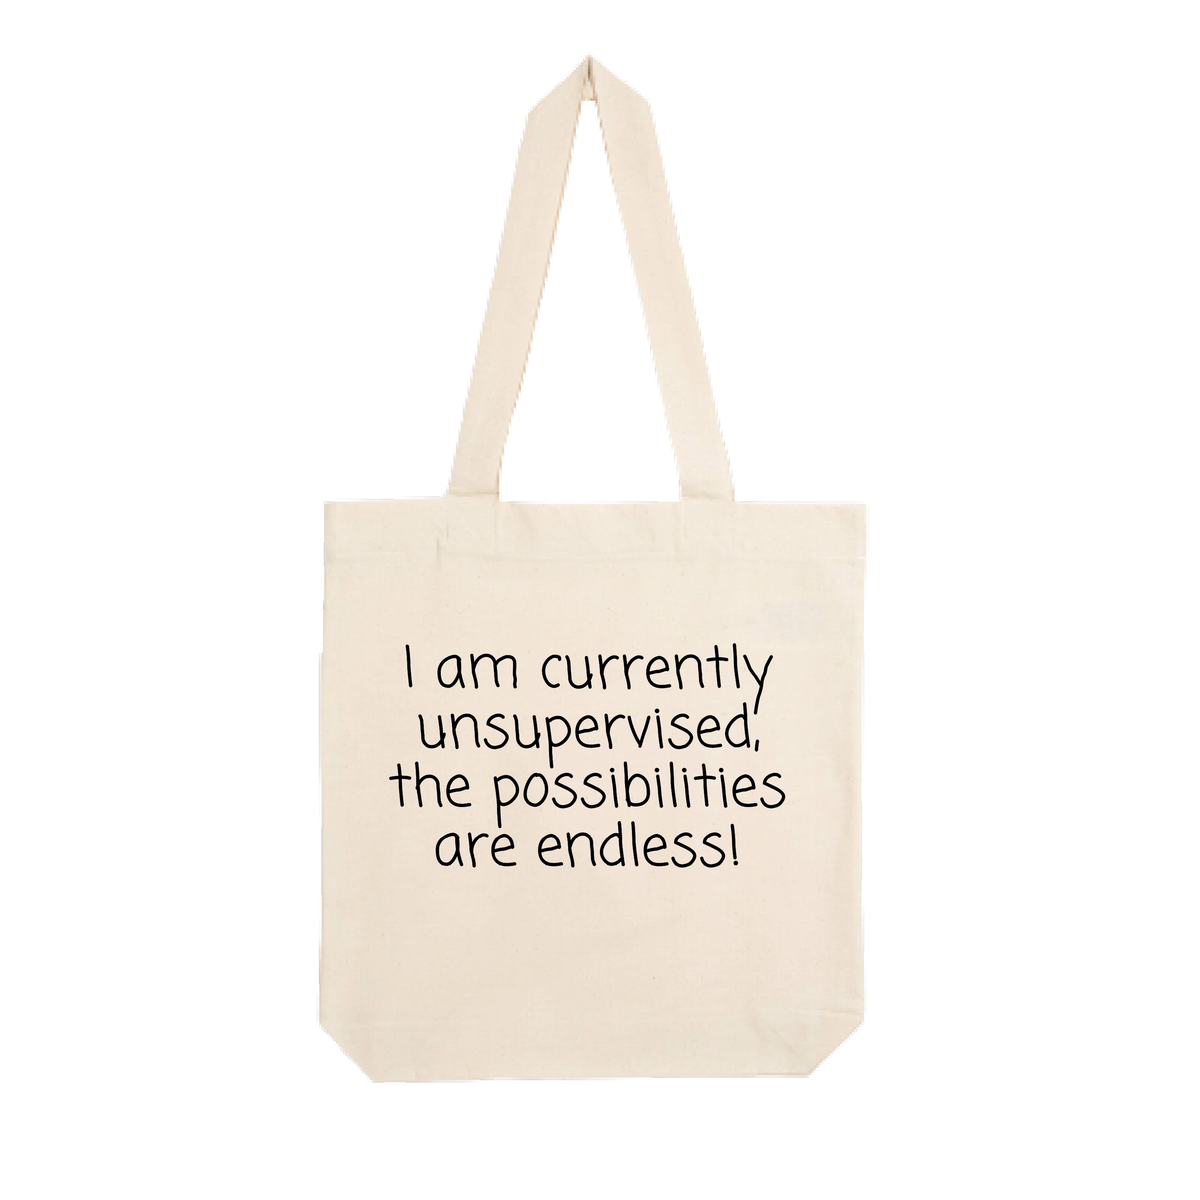 I AM CURRENTLY UNSUPERVISED THE POSSIBILITIES ARE ENDLESS! Tote Bag